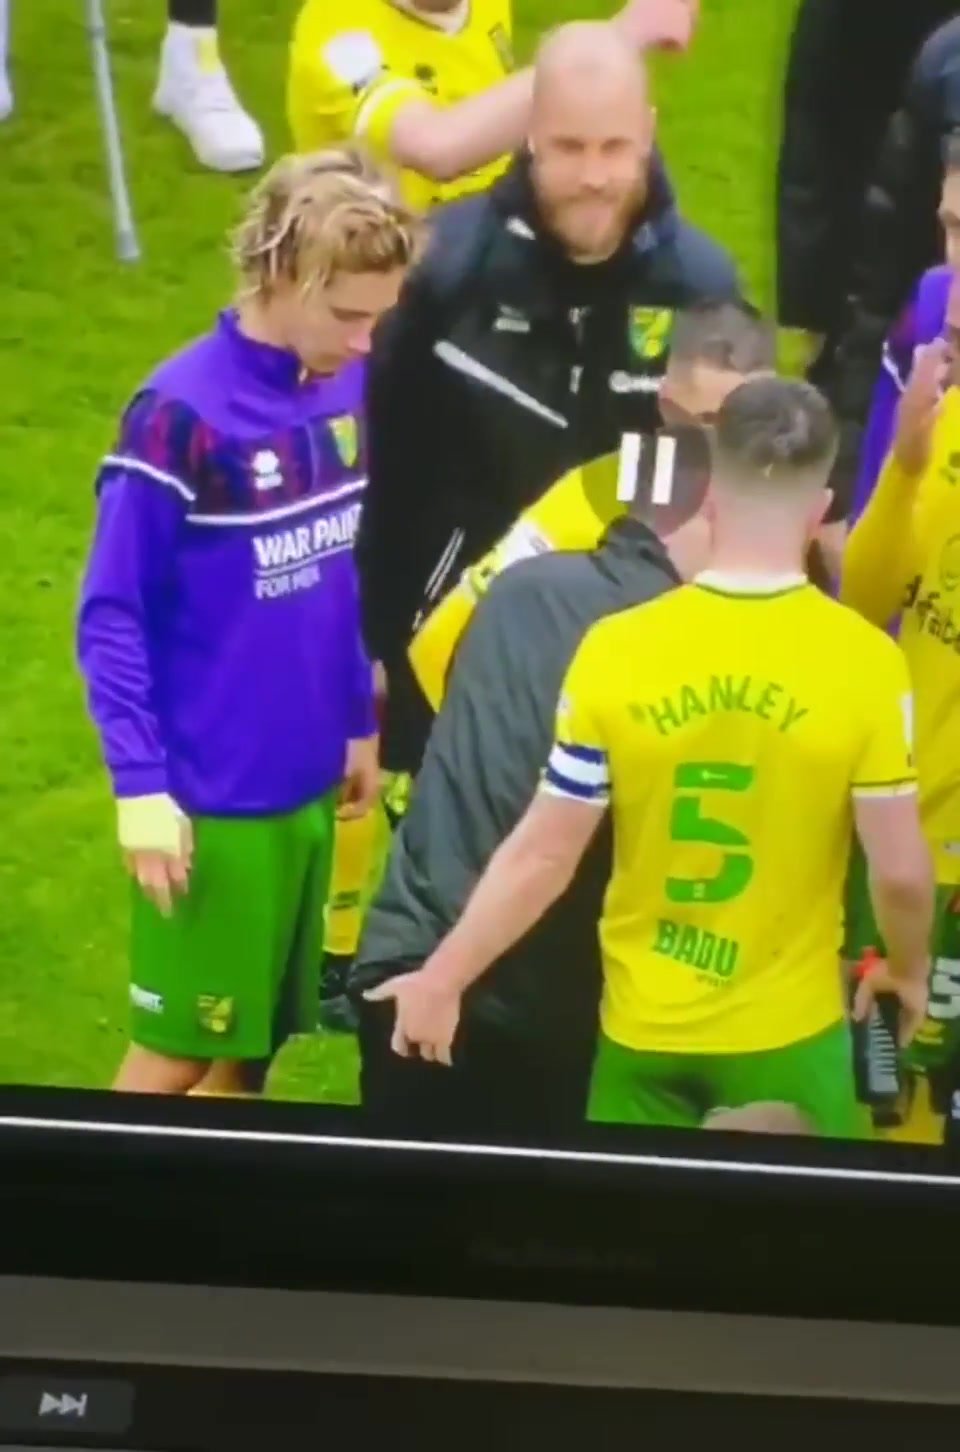 Soccer player playing with teammate's asshole